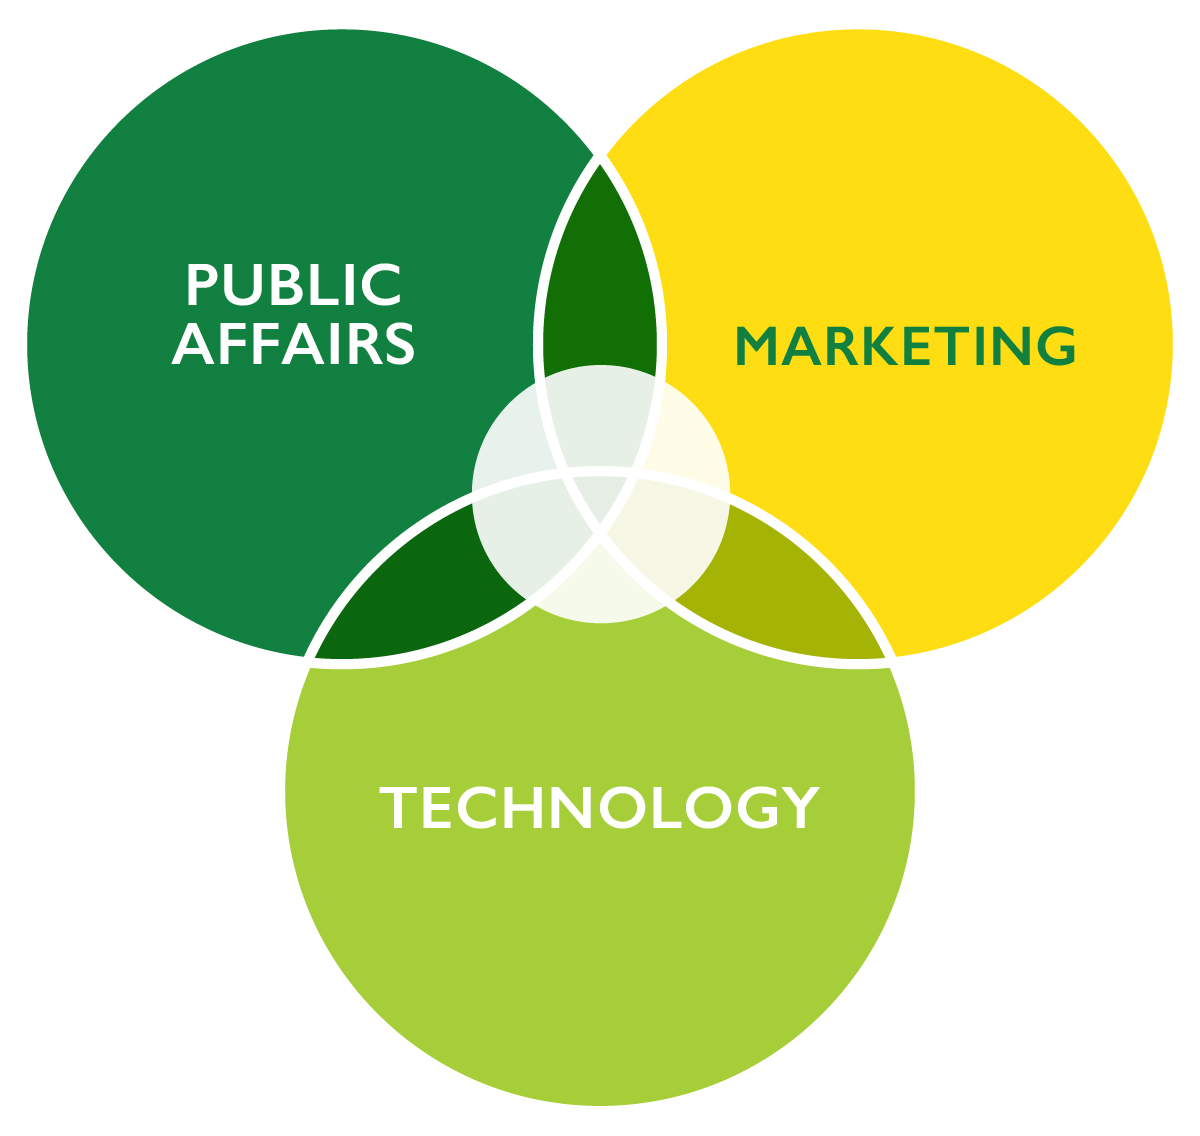 Tripepi Smith's venn diagram showing its position at the nexus of public affairs, marketing, and technology.